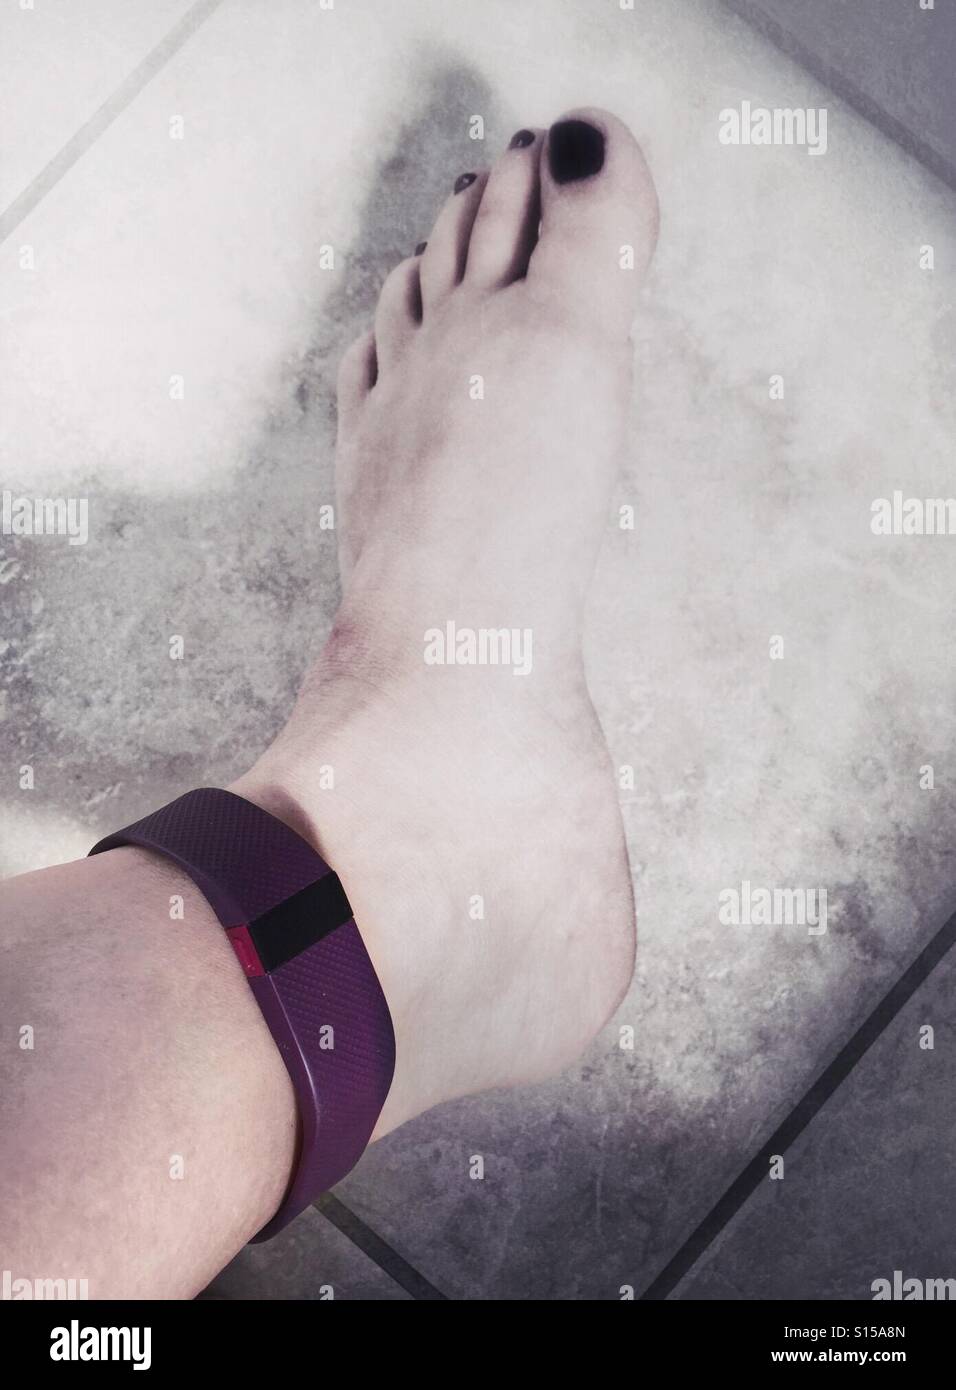 A Fitbit fitness tracker worn on an ankle Stock Photo - Alamy